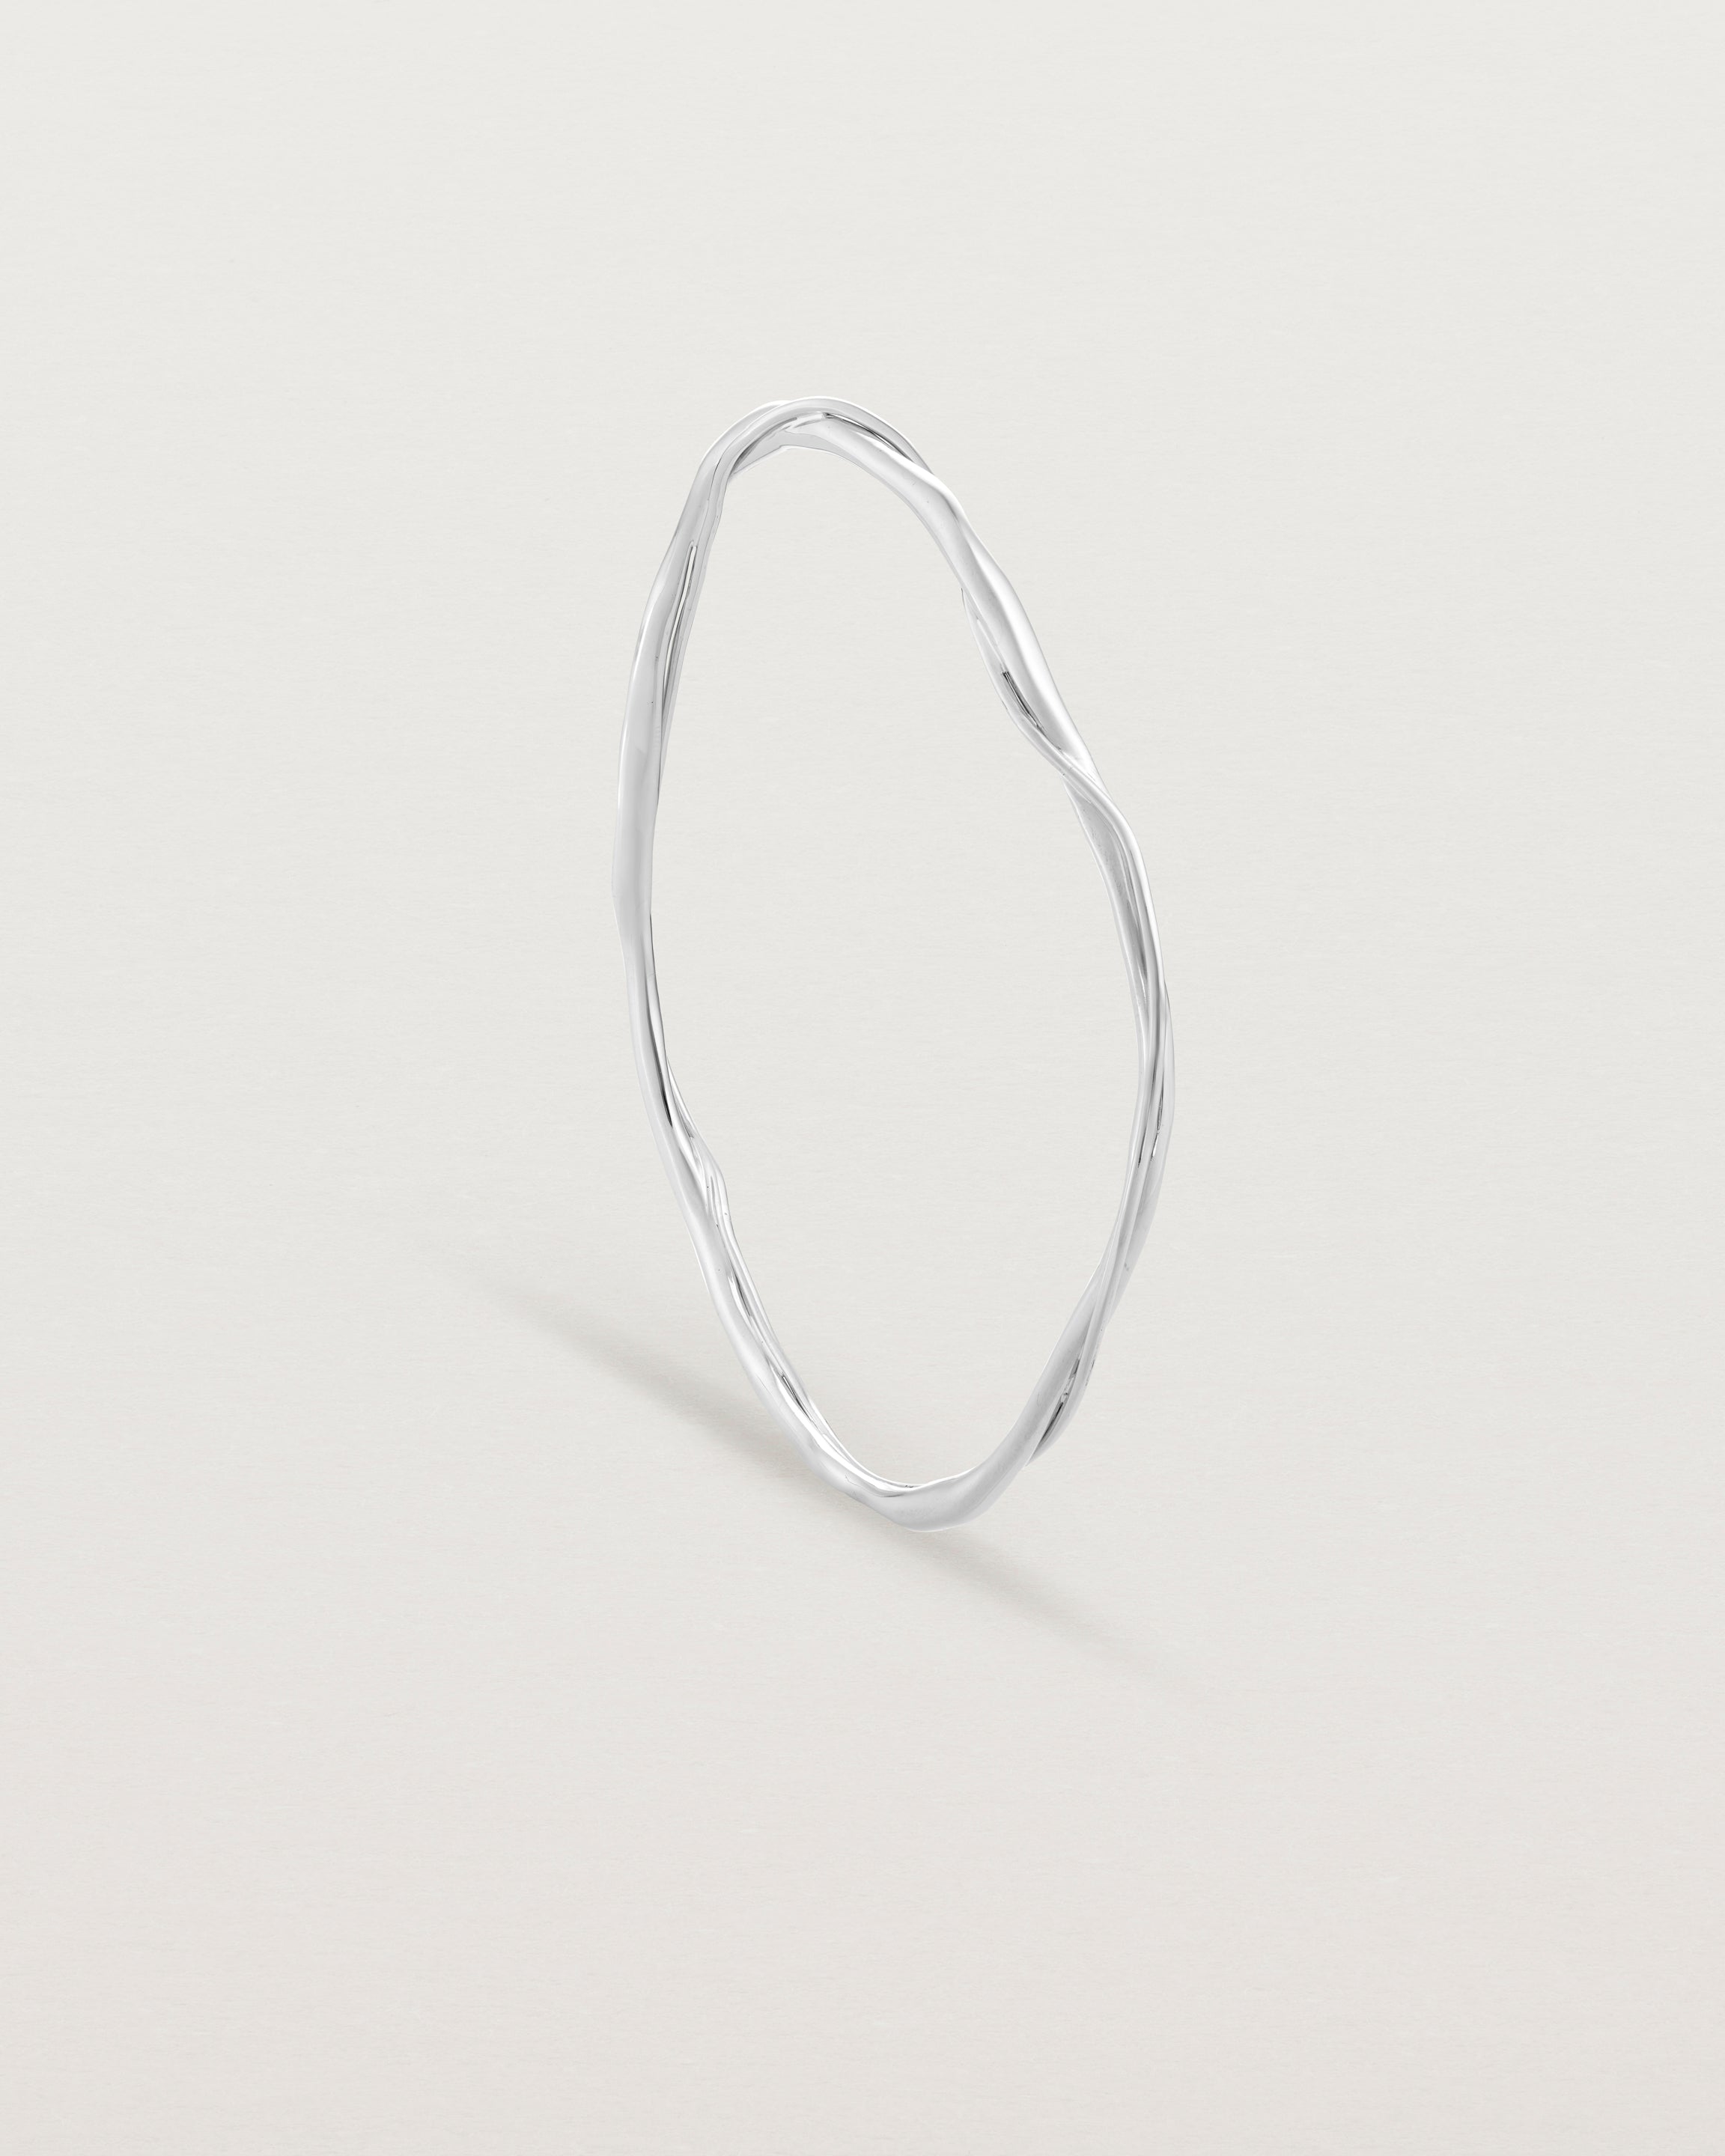 Standing view of the Dalí Bangle in sterling silver.